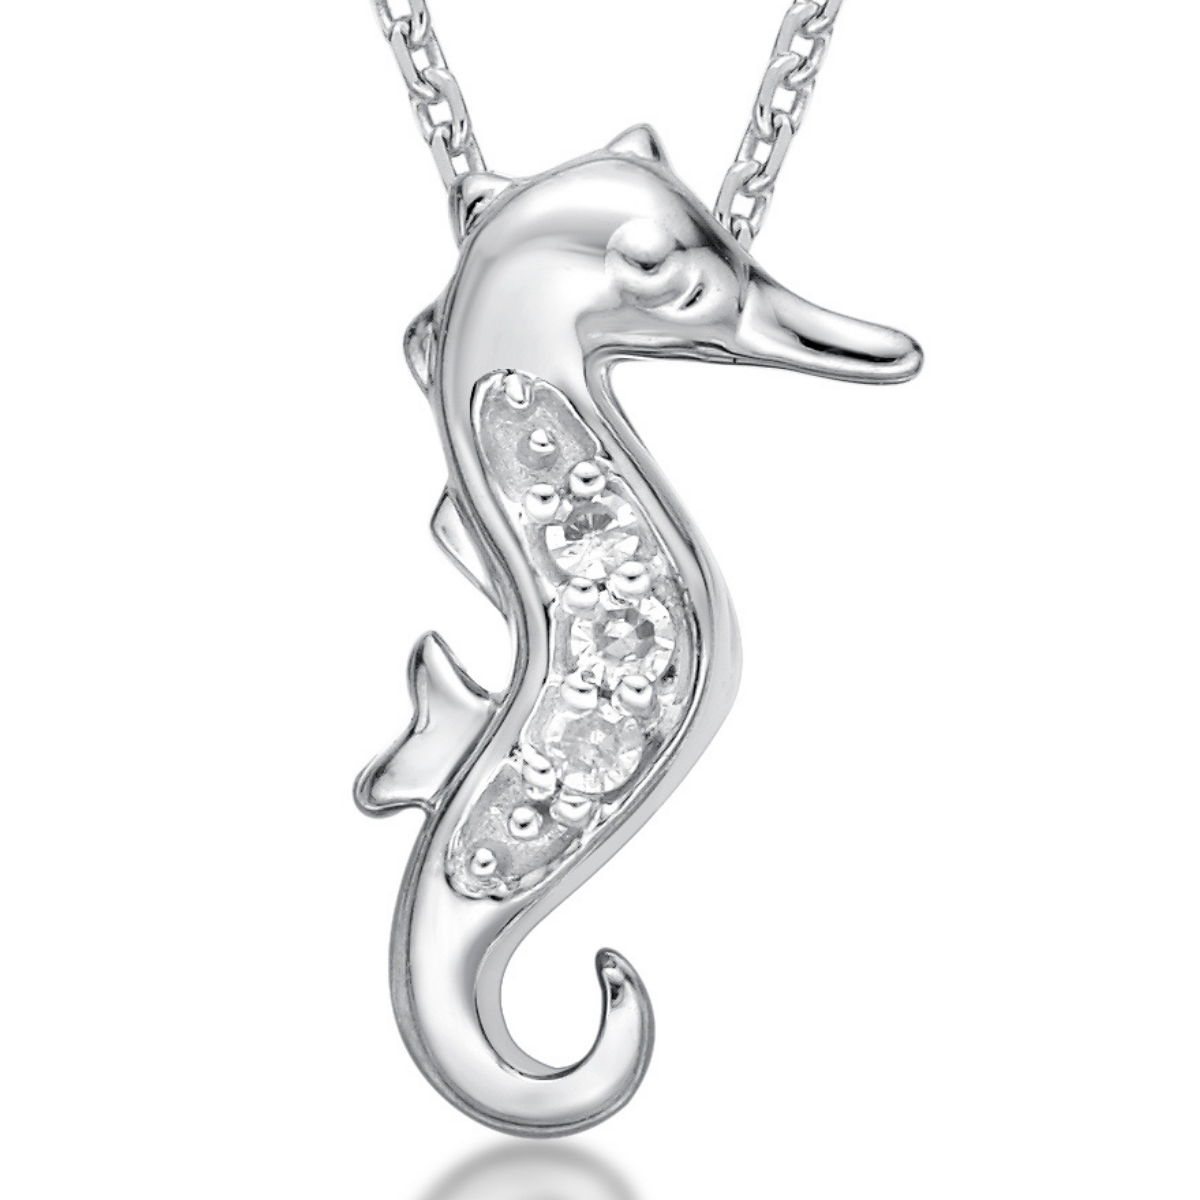 Lavari Jewelers Women's Mini Seahorse Diamond Pendant with Lobster Clasp, 10K White Gold, .01 Cttw, 18 Inch Cable Chain